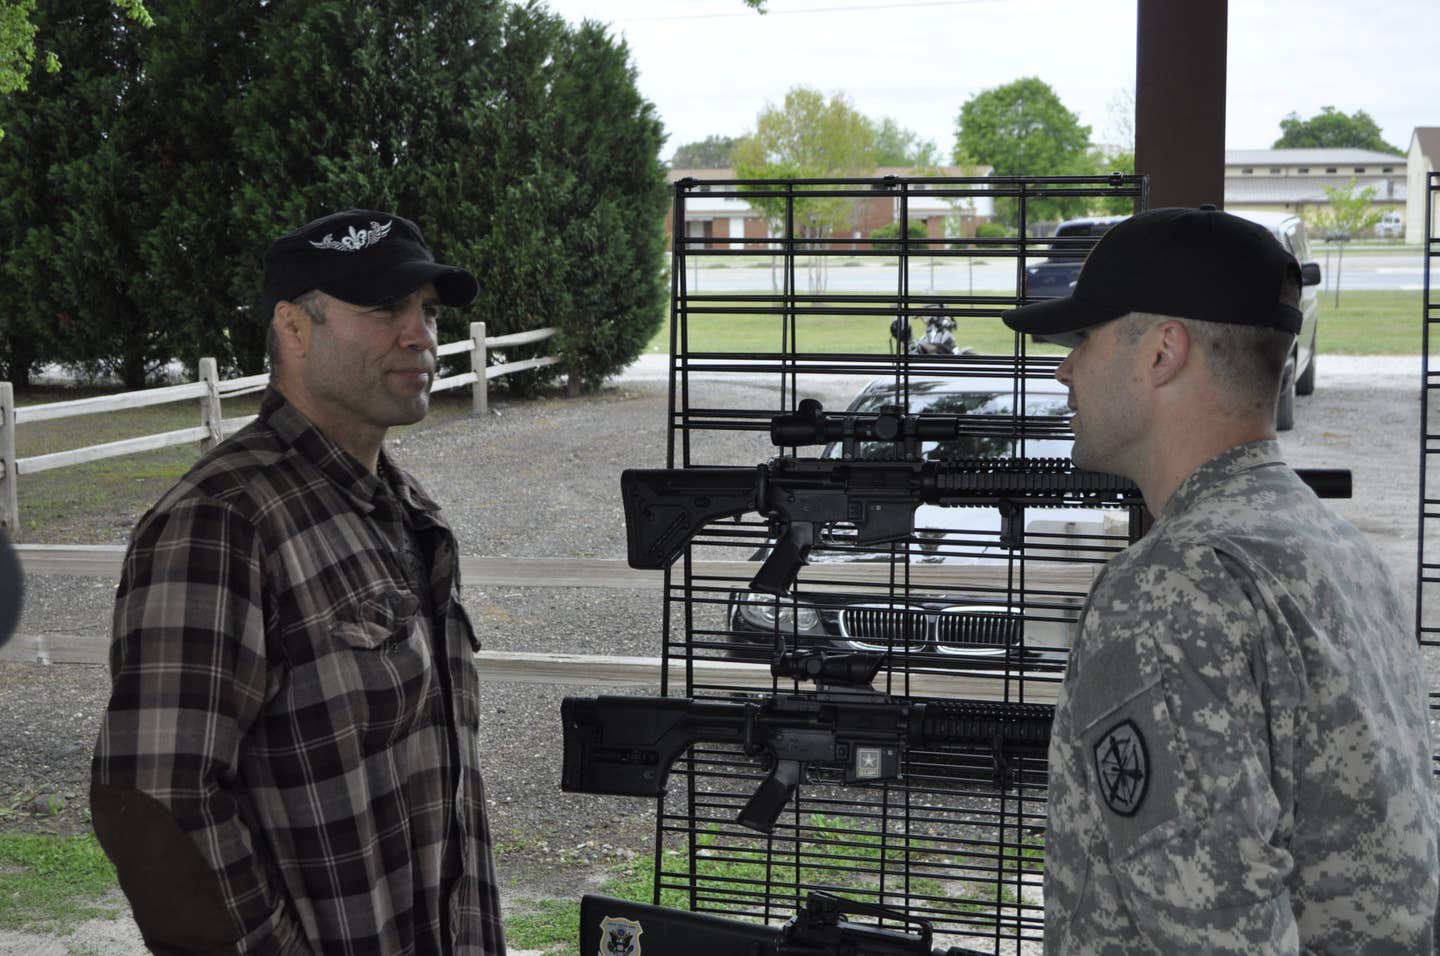 Former UFC champion Randy Couture spent the afternoon with the Army Marksmanship Unit seeing what the AMU does and getting to know the troops April 17. (Photo from Ft. Benning)